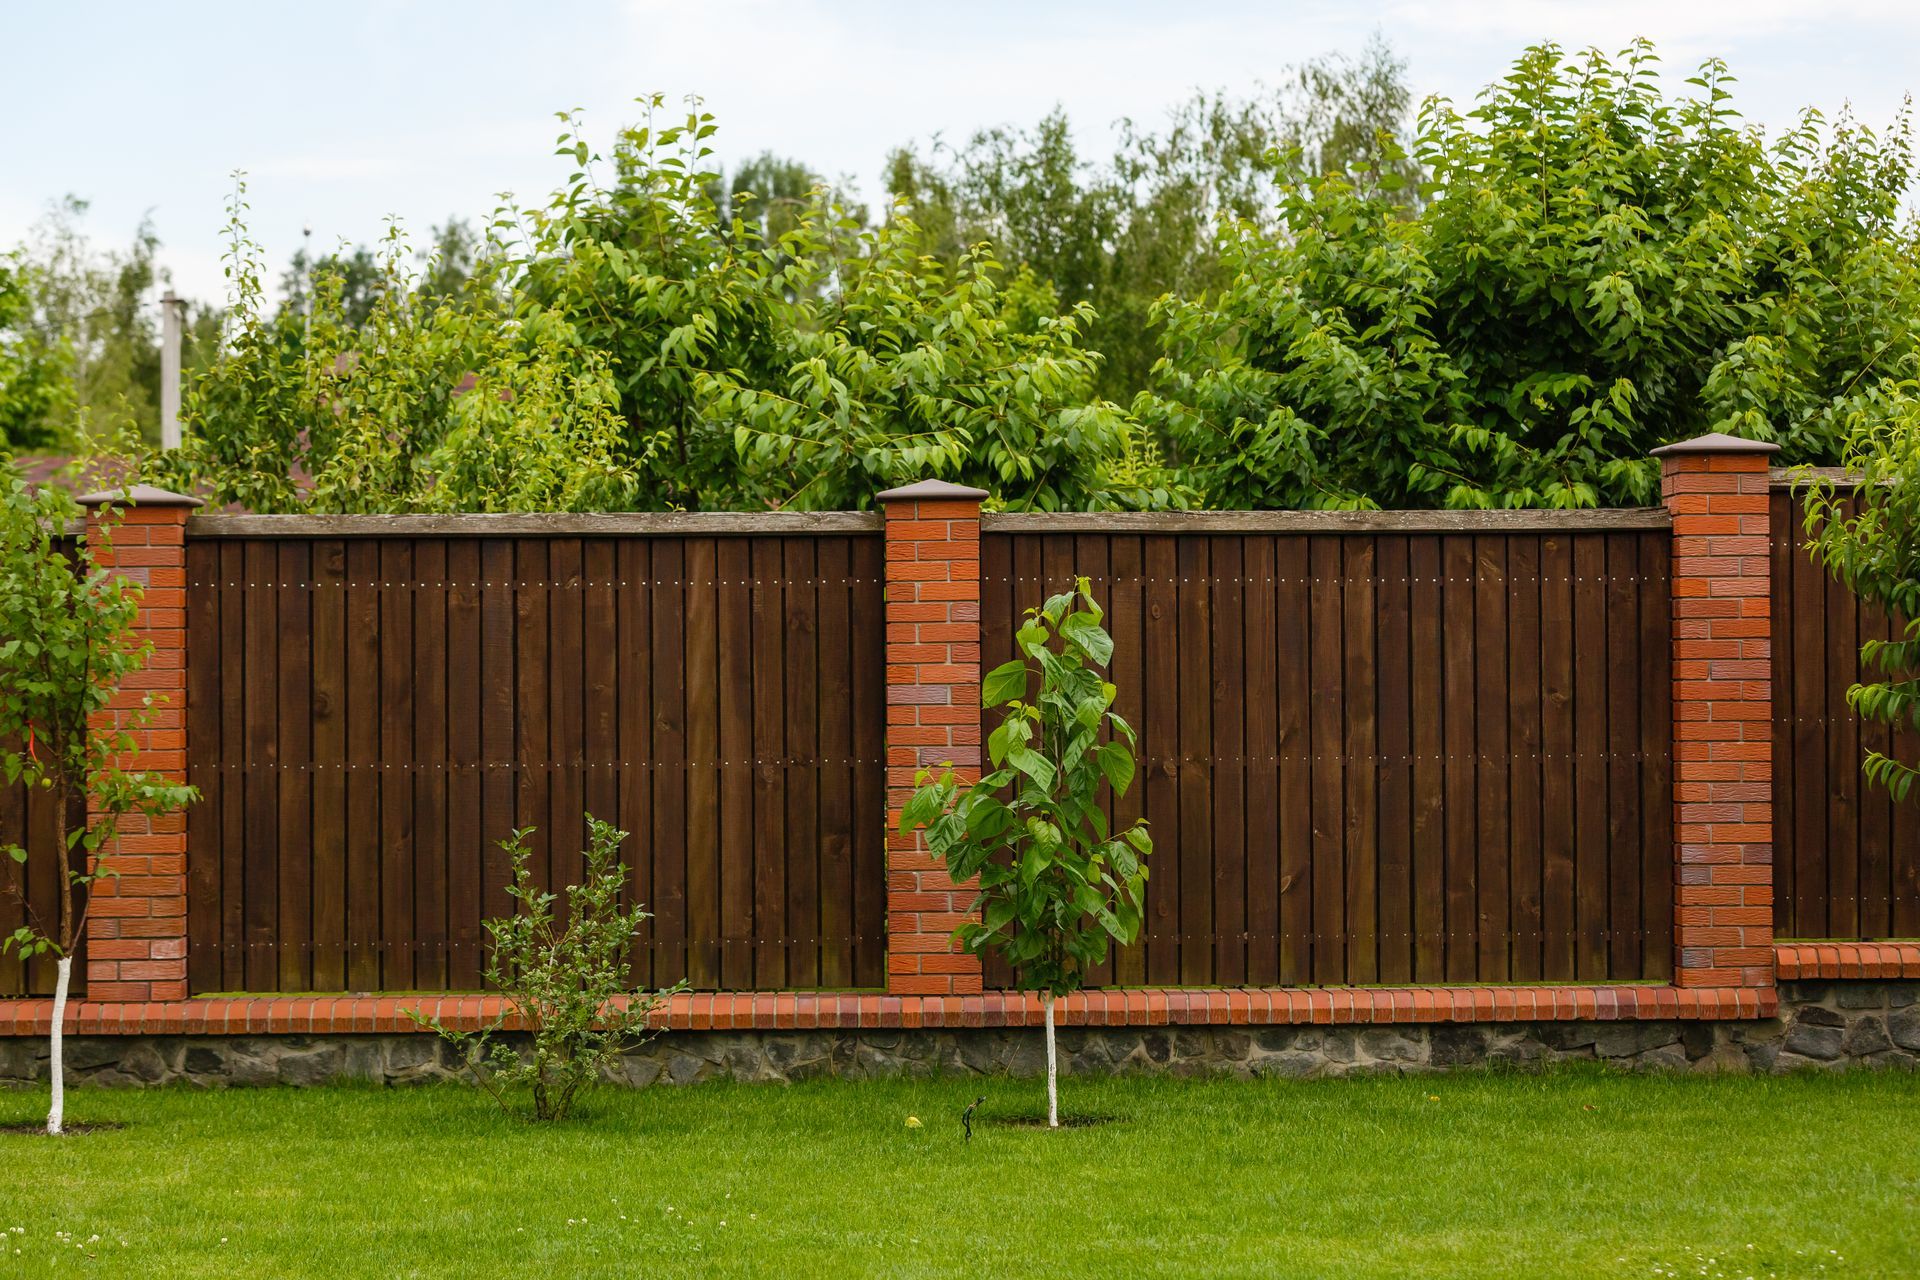 Spacious green lawn bordered by a new wooden fence, adorned with sturdy stone brick pillars.